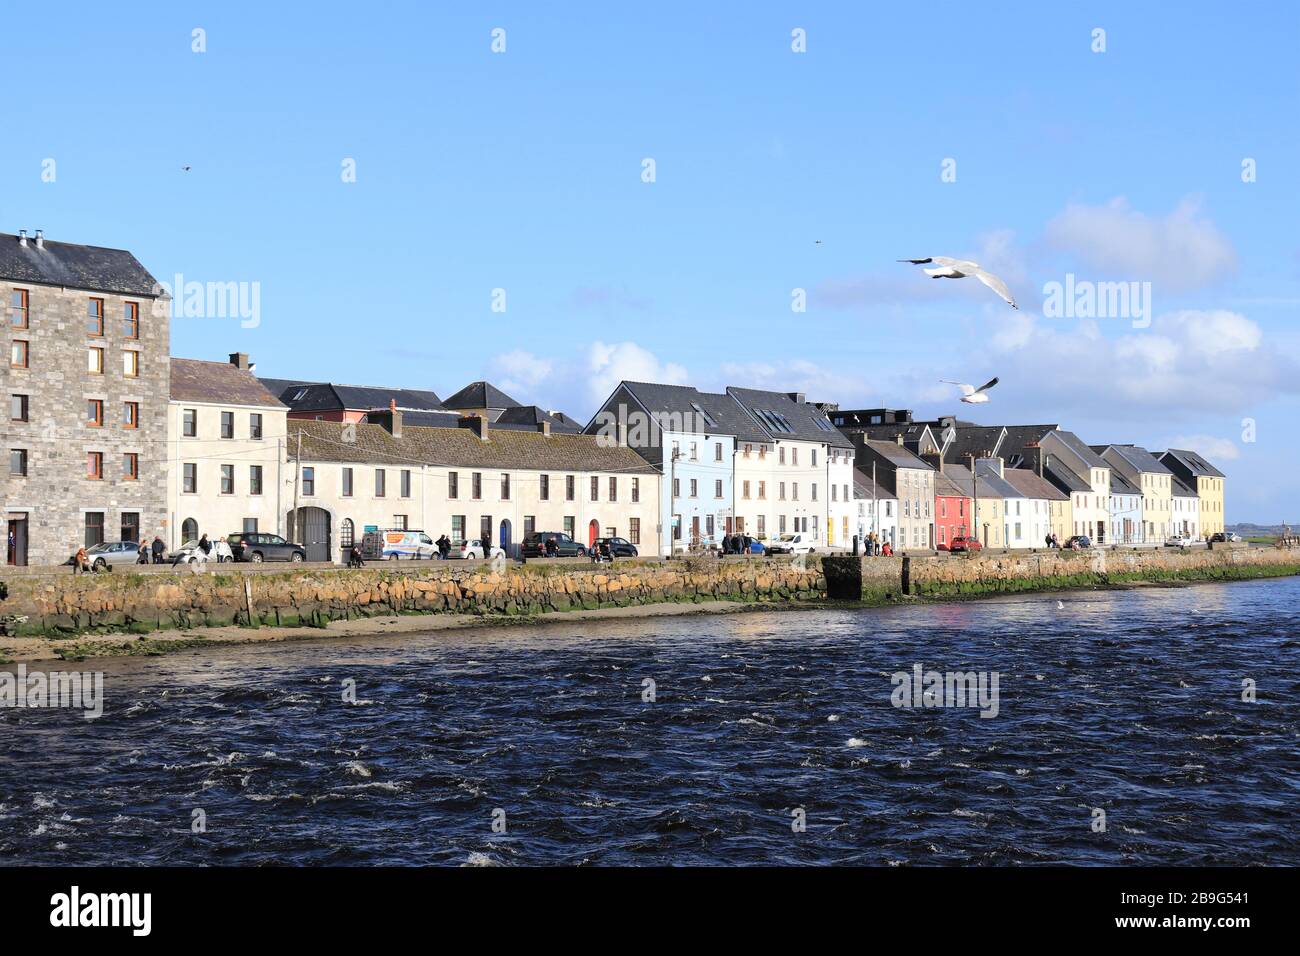 choppy blue waters in the foreground, The  Long Walk, Galway City at the back, sea gulls flying in the sky Stock Photo